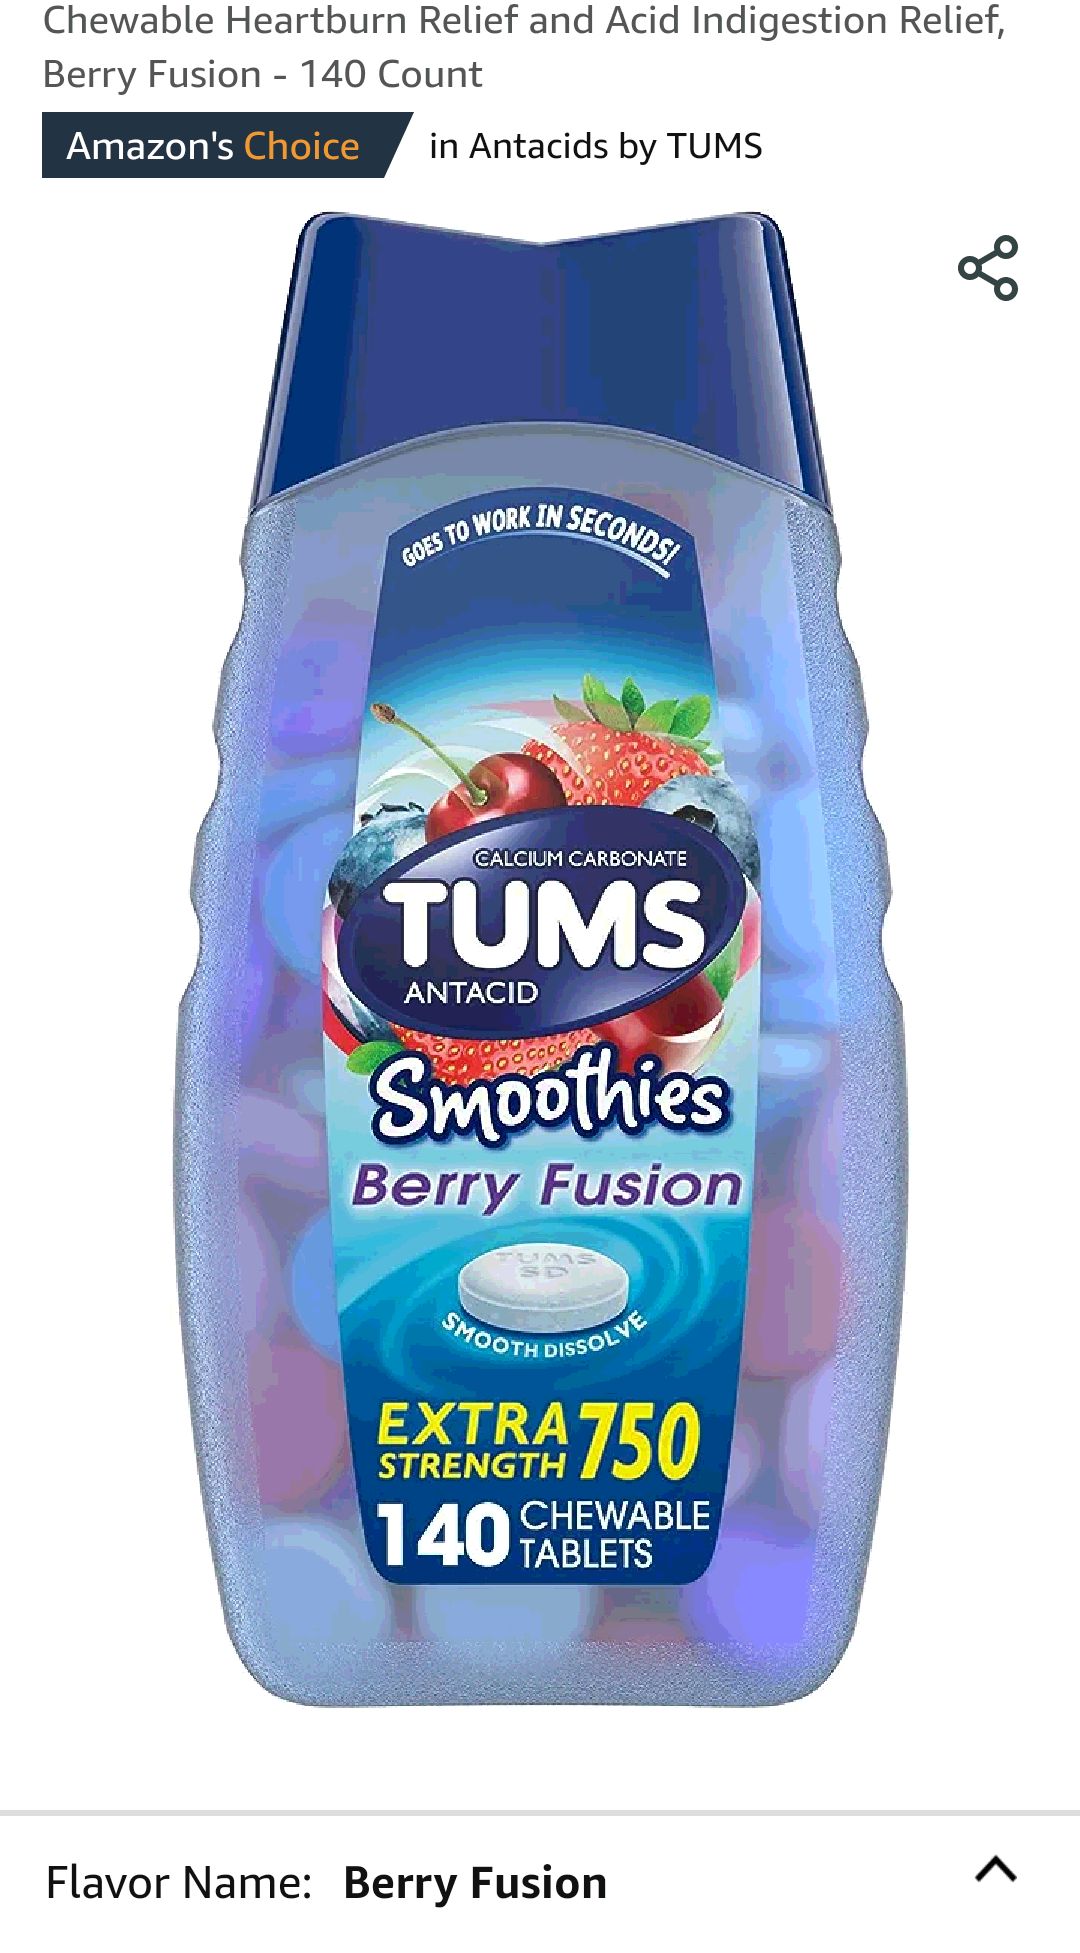 TUMS Smoothies Extra Strength Antacid Tablets for Chewable Heartburn Relief and Acid Indigestion Relief, Berry Fusion - 140 Count : Health & Household